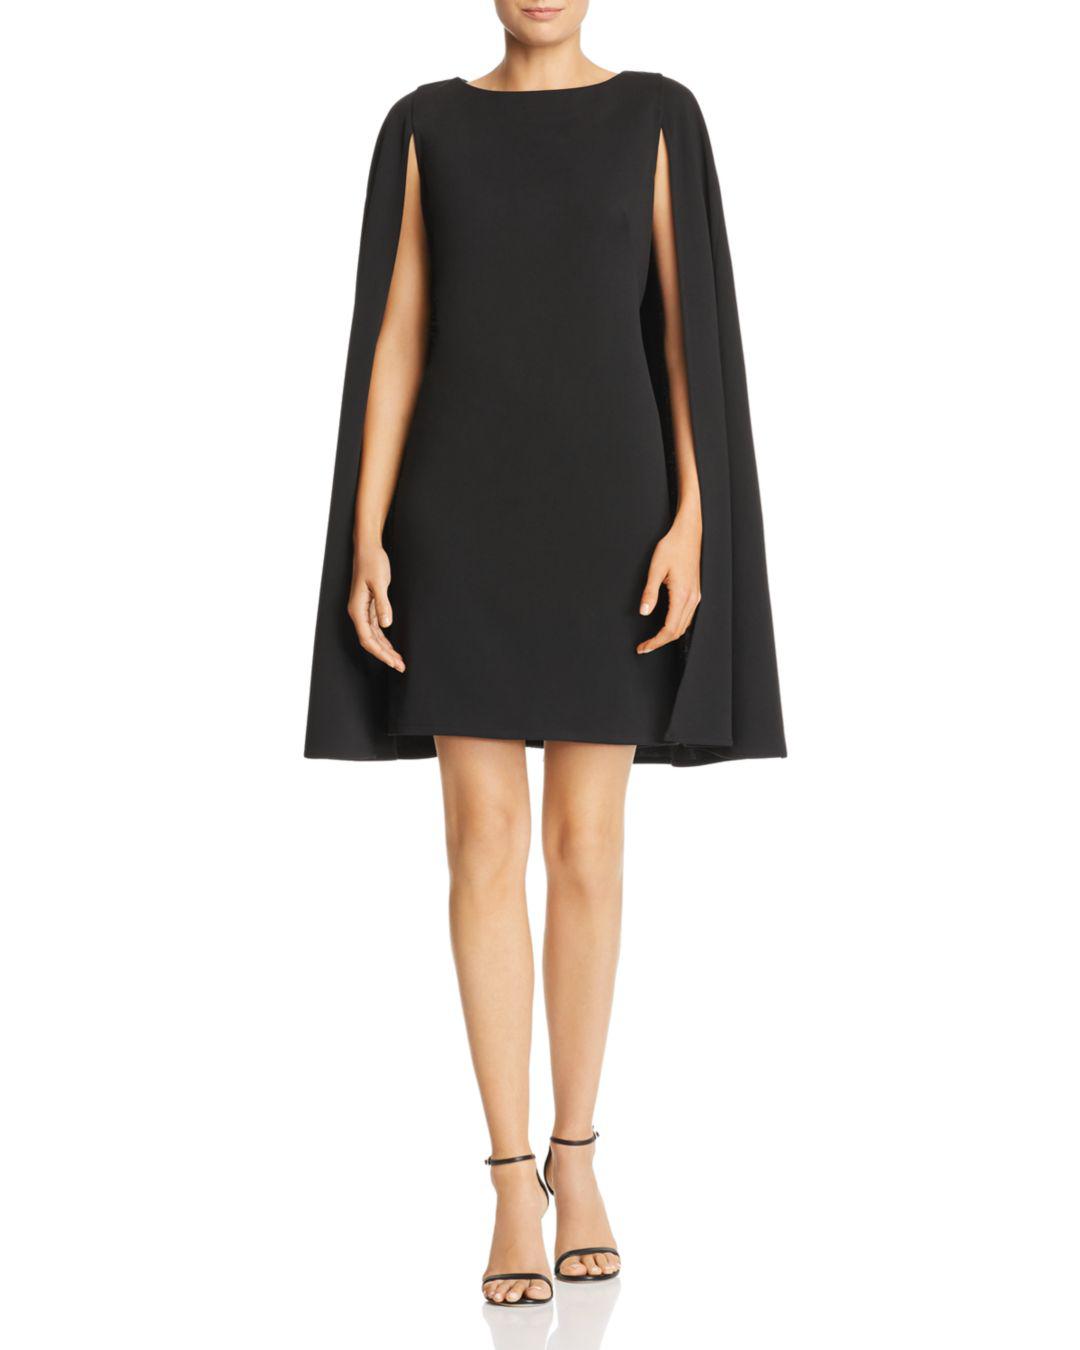 Adrianna Papell Cape Overlay Dress in ...